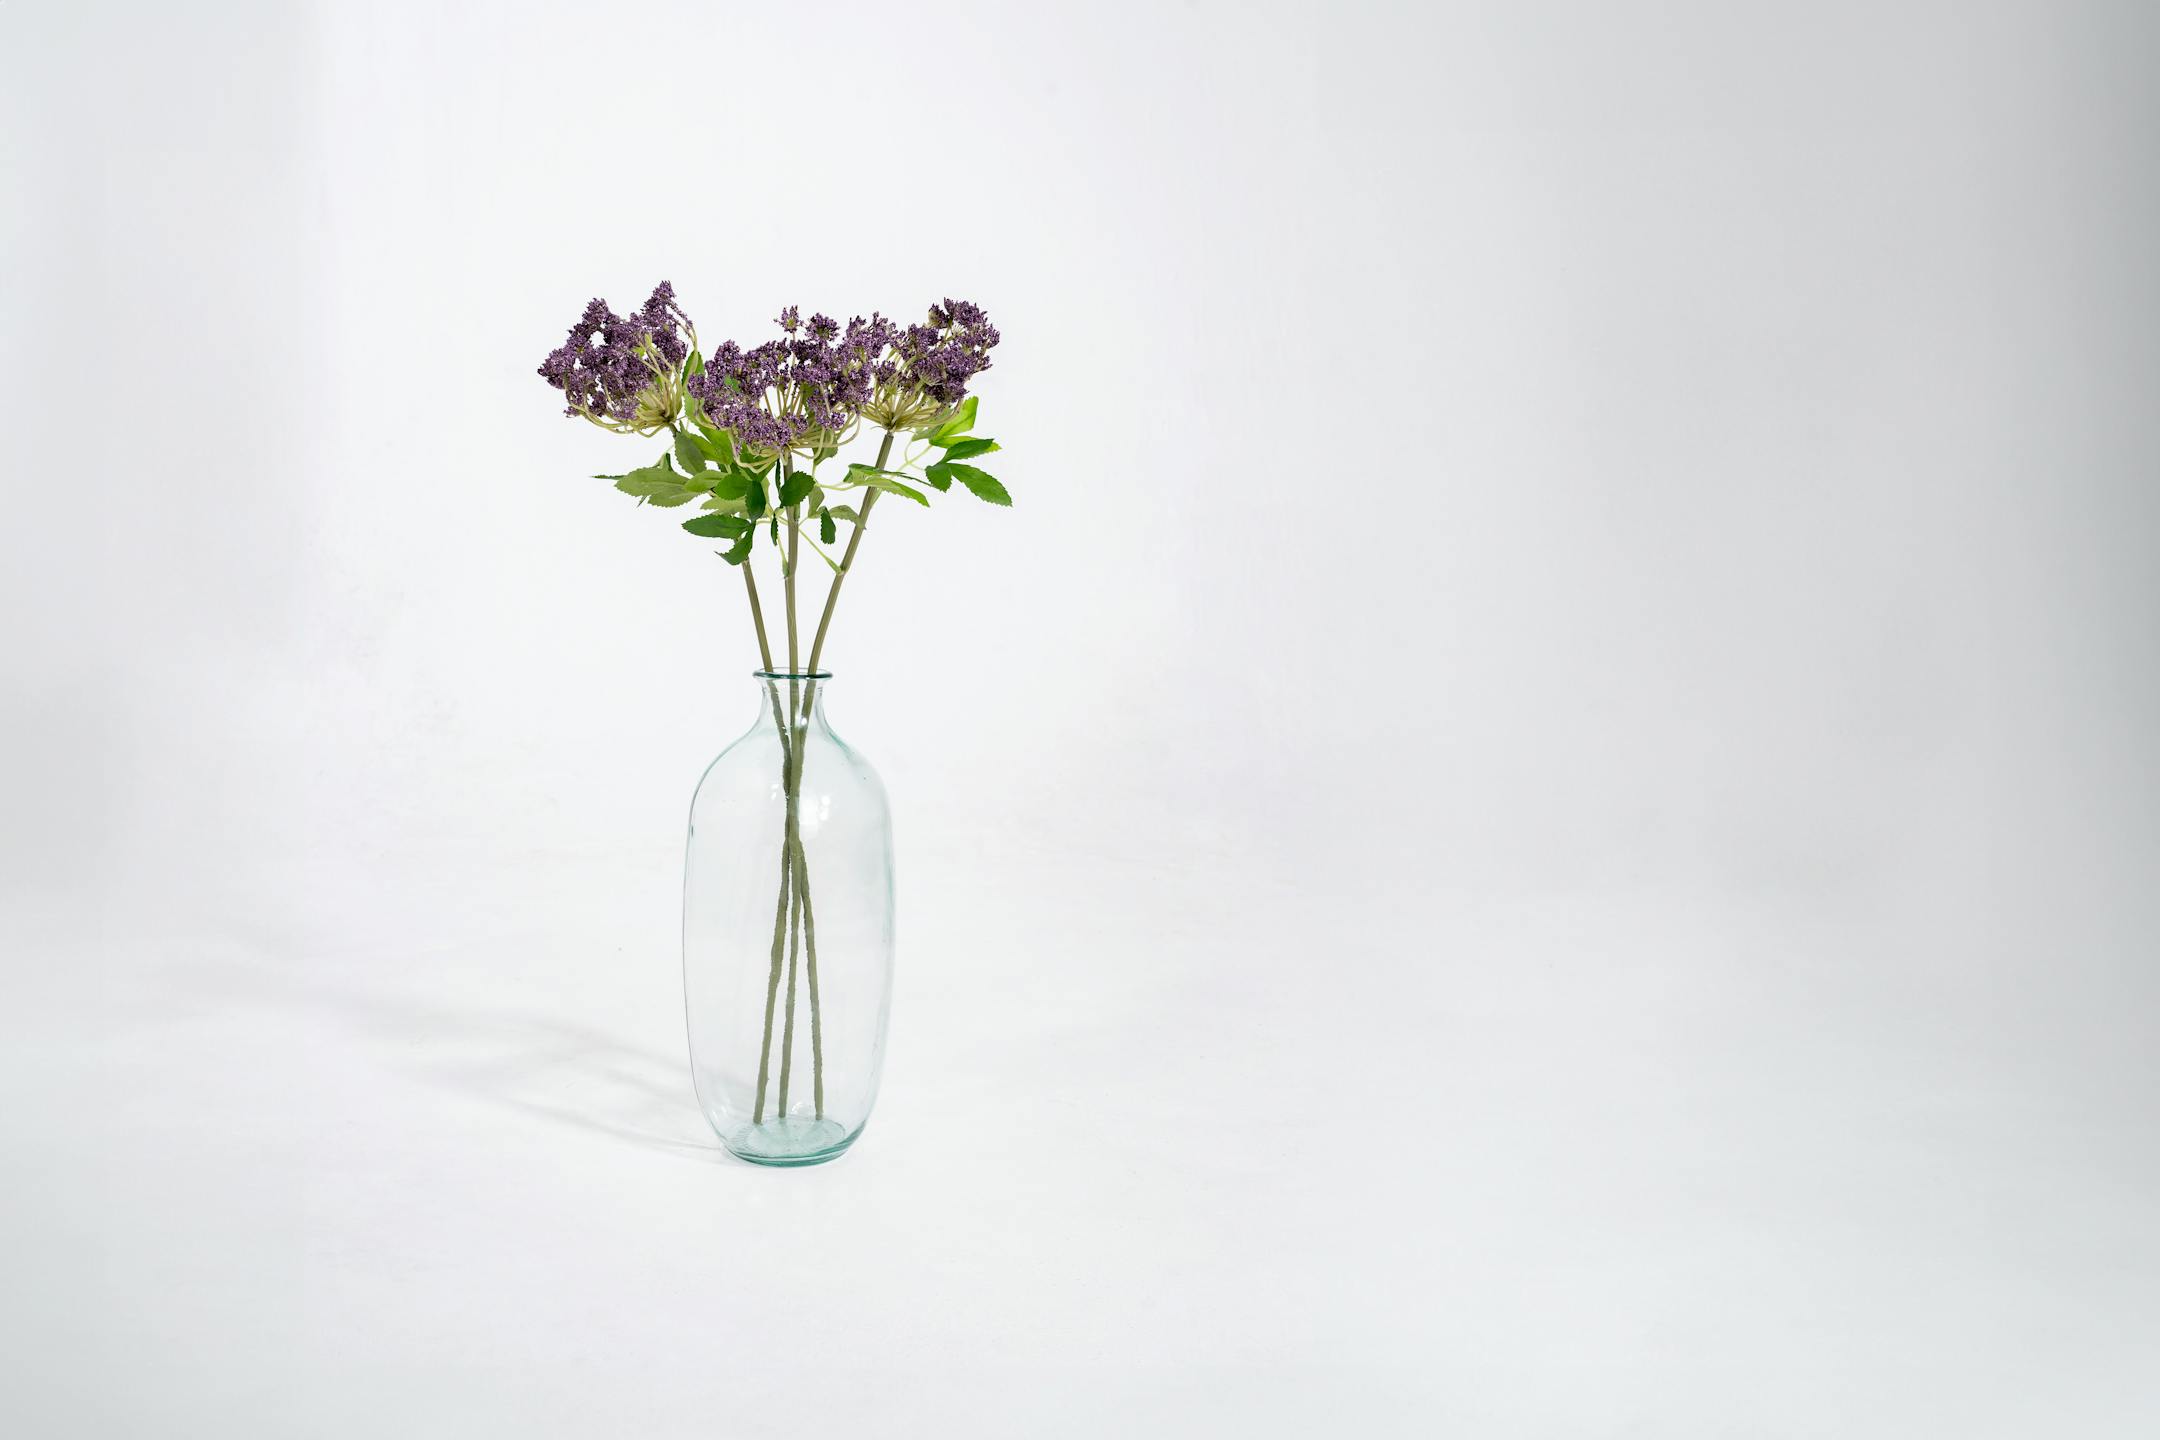 Three purple artificial cow parsley stems in glass vase